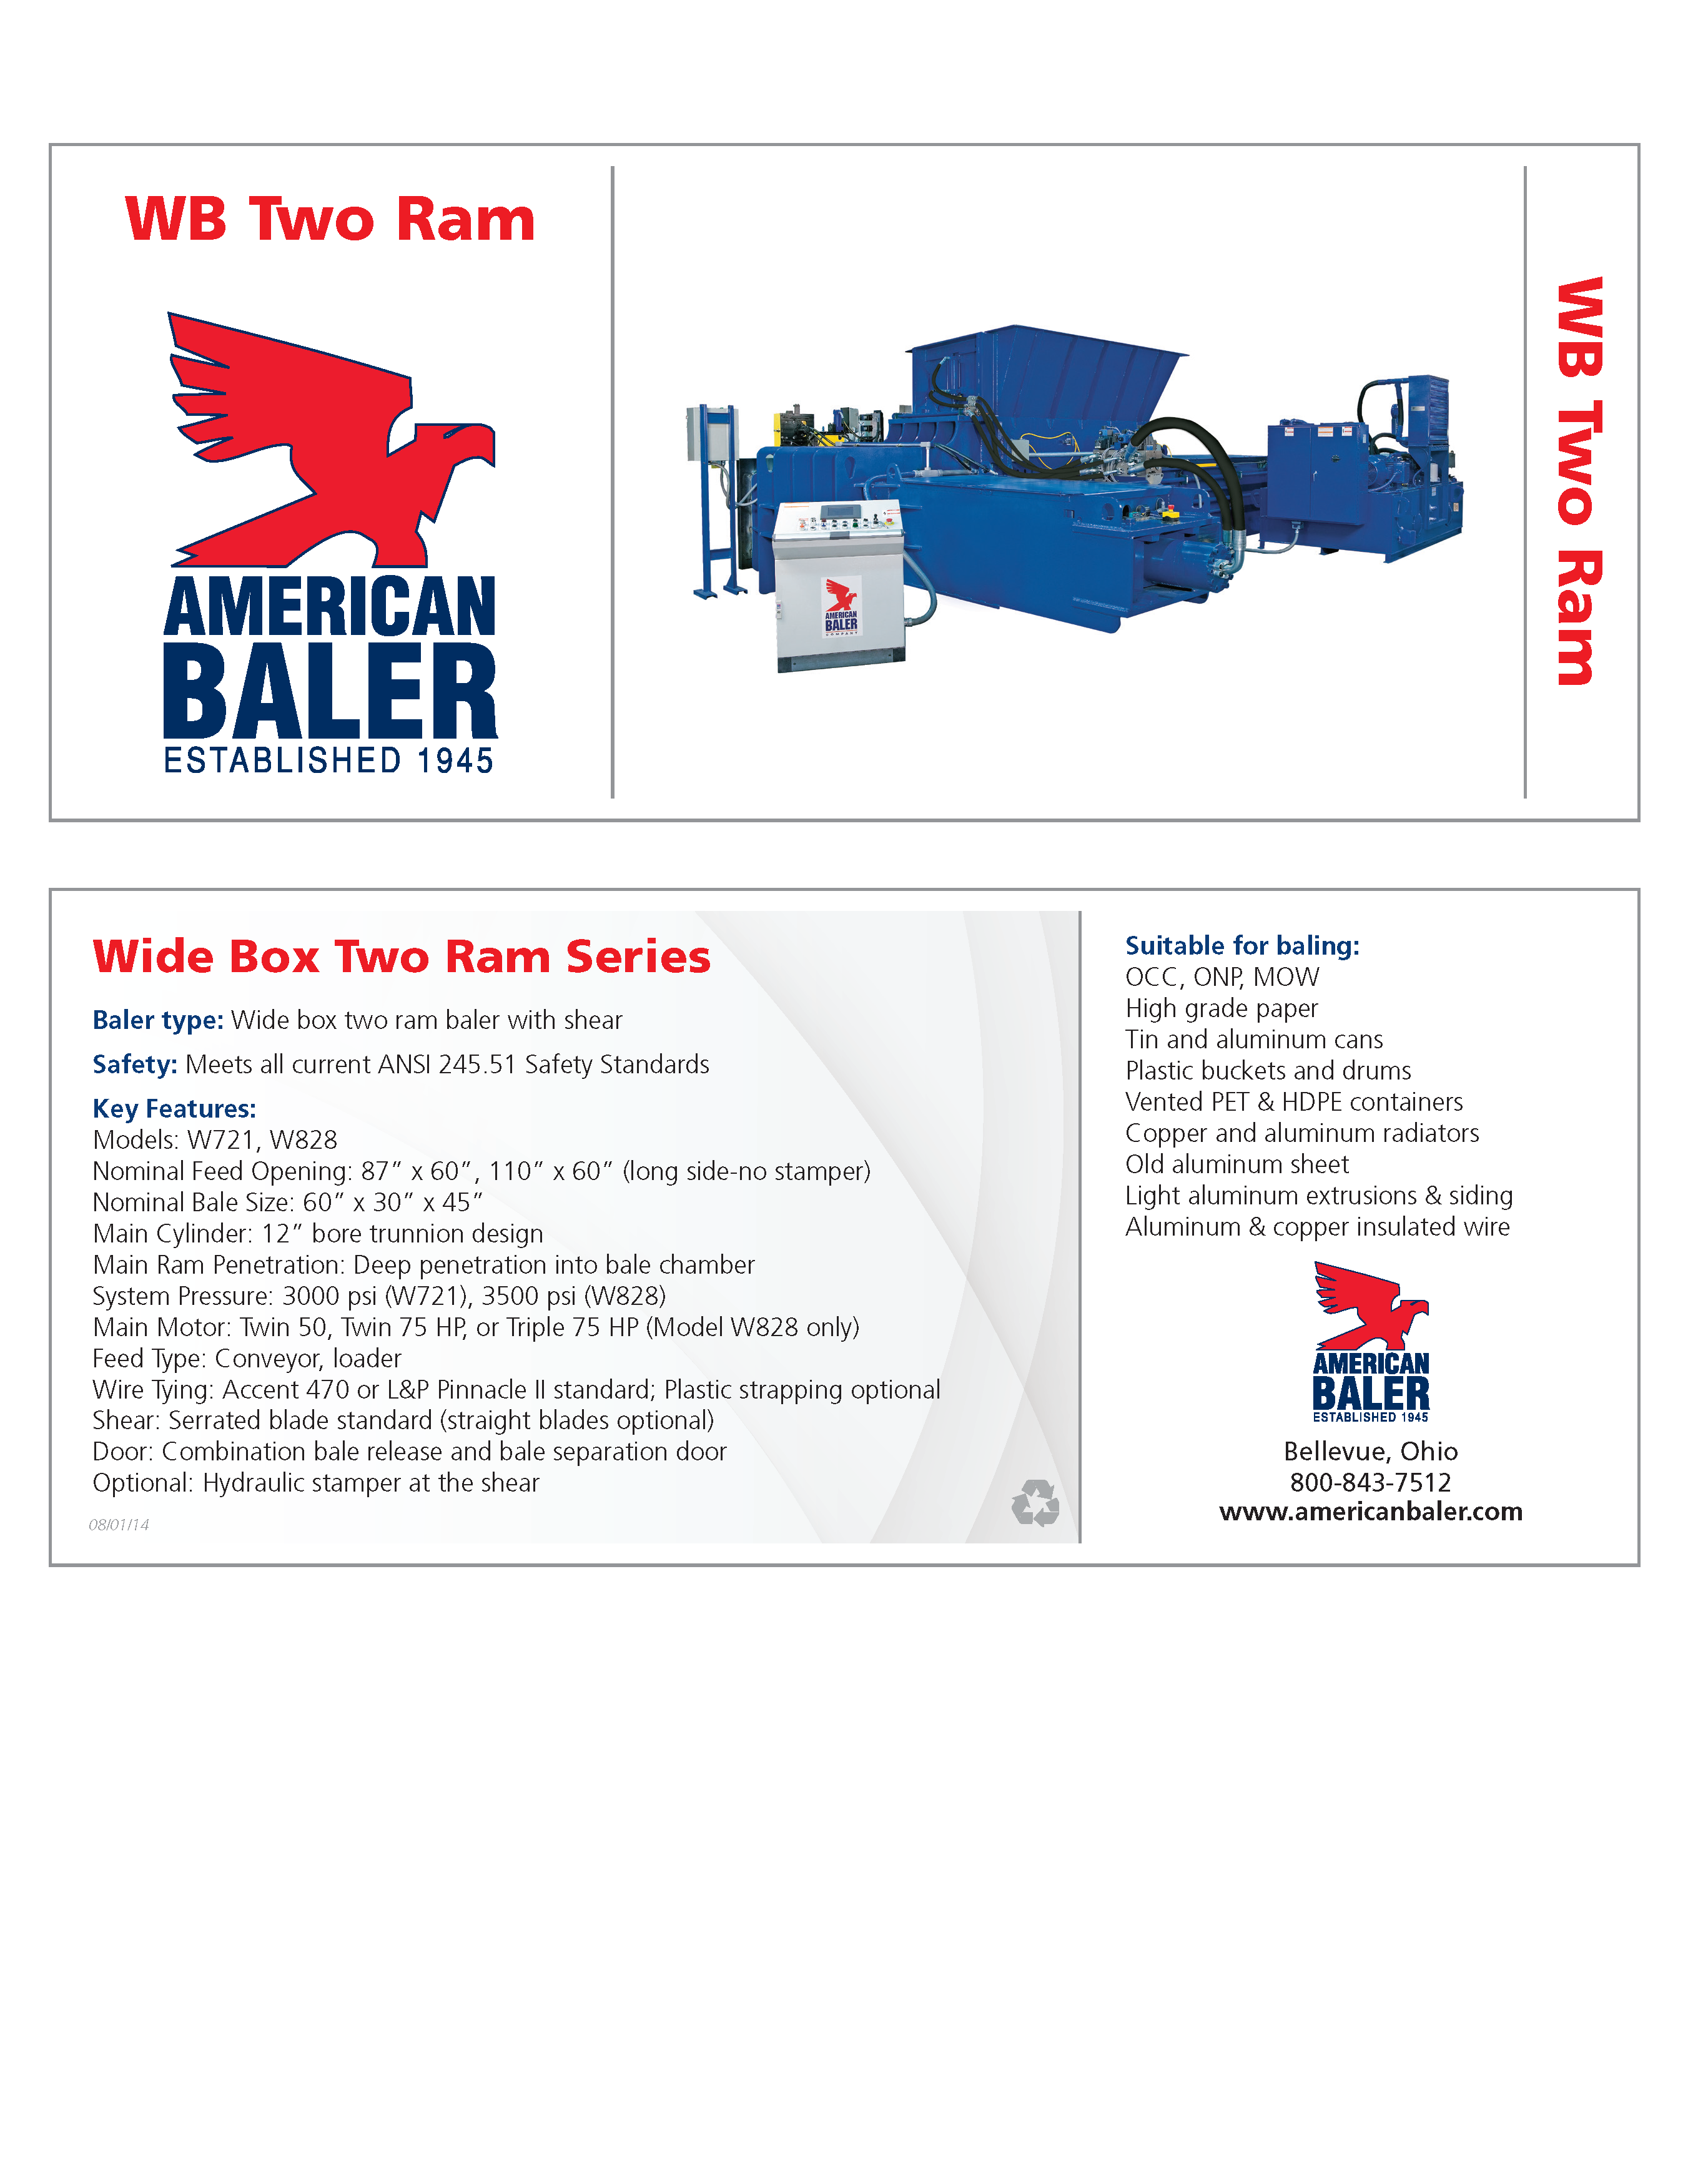 Learn more about the WB Series Balers in the American Baler Brochure